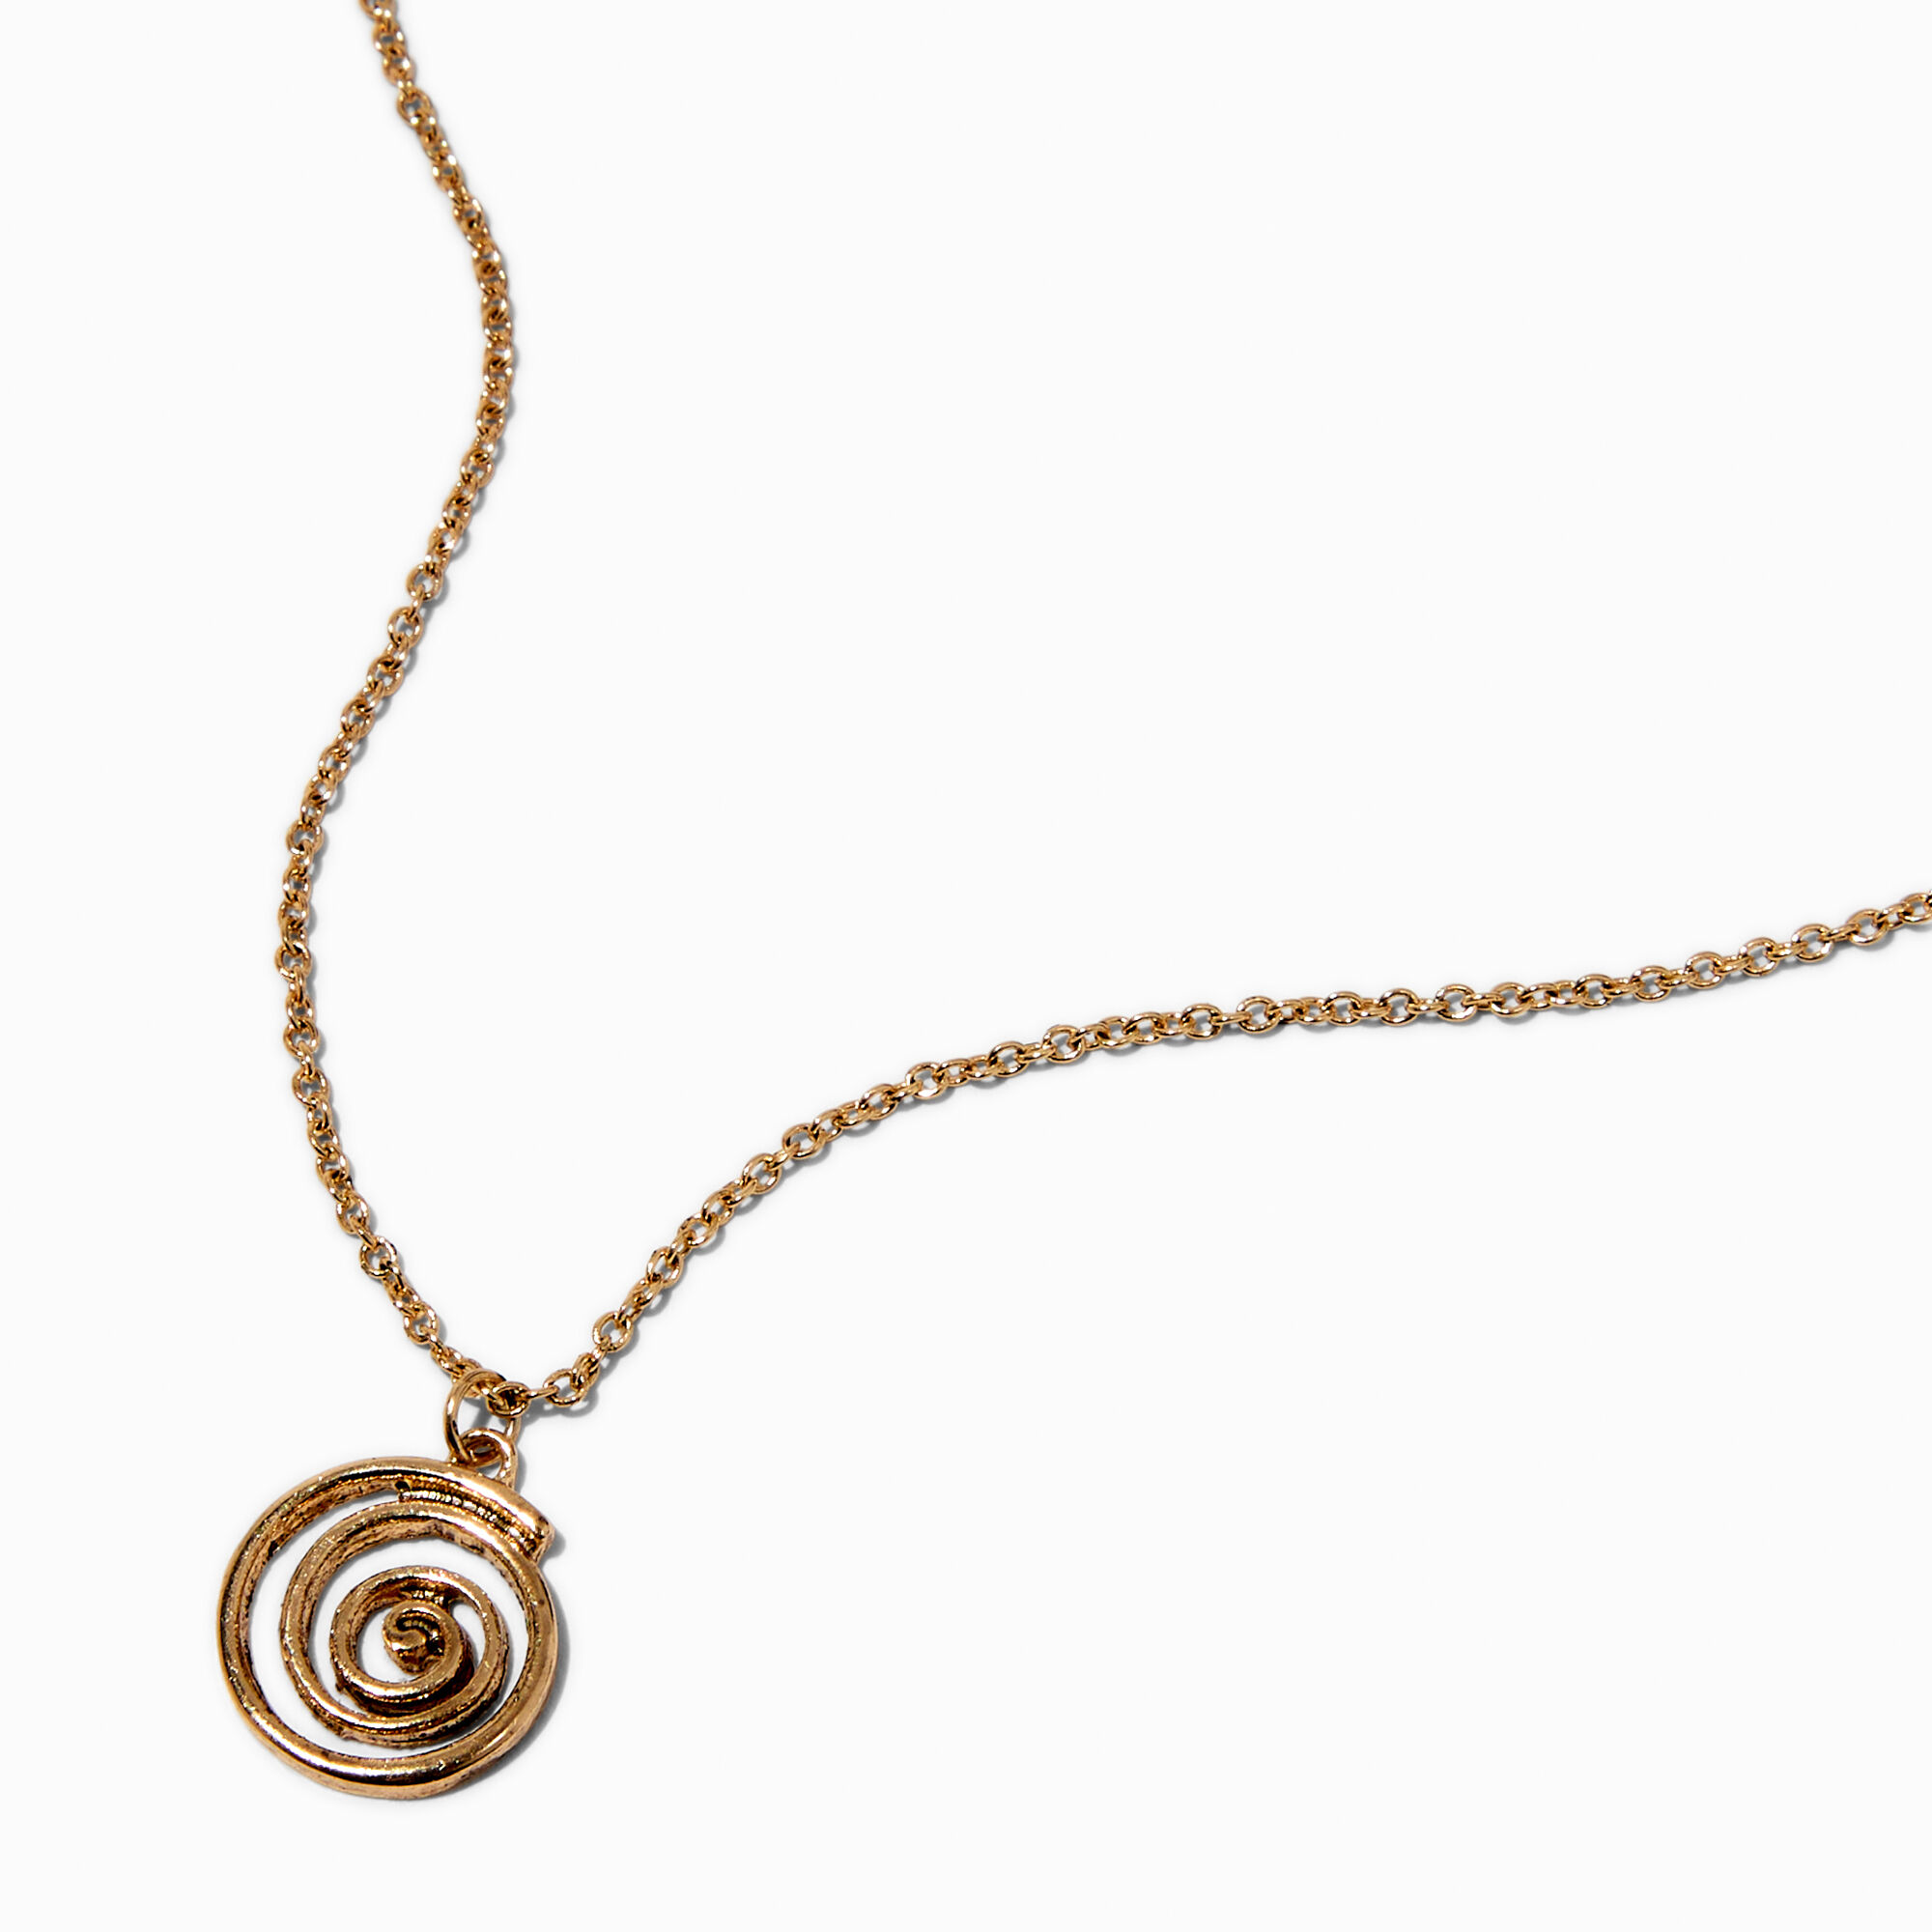 View Claires Tone Spiral Pendant Necklace Gold information